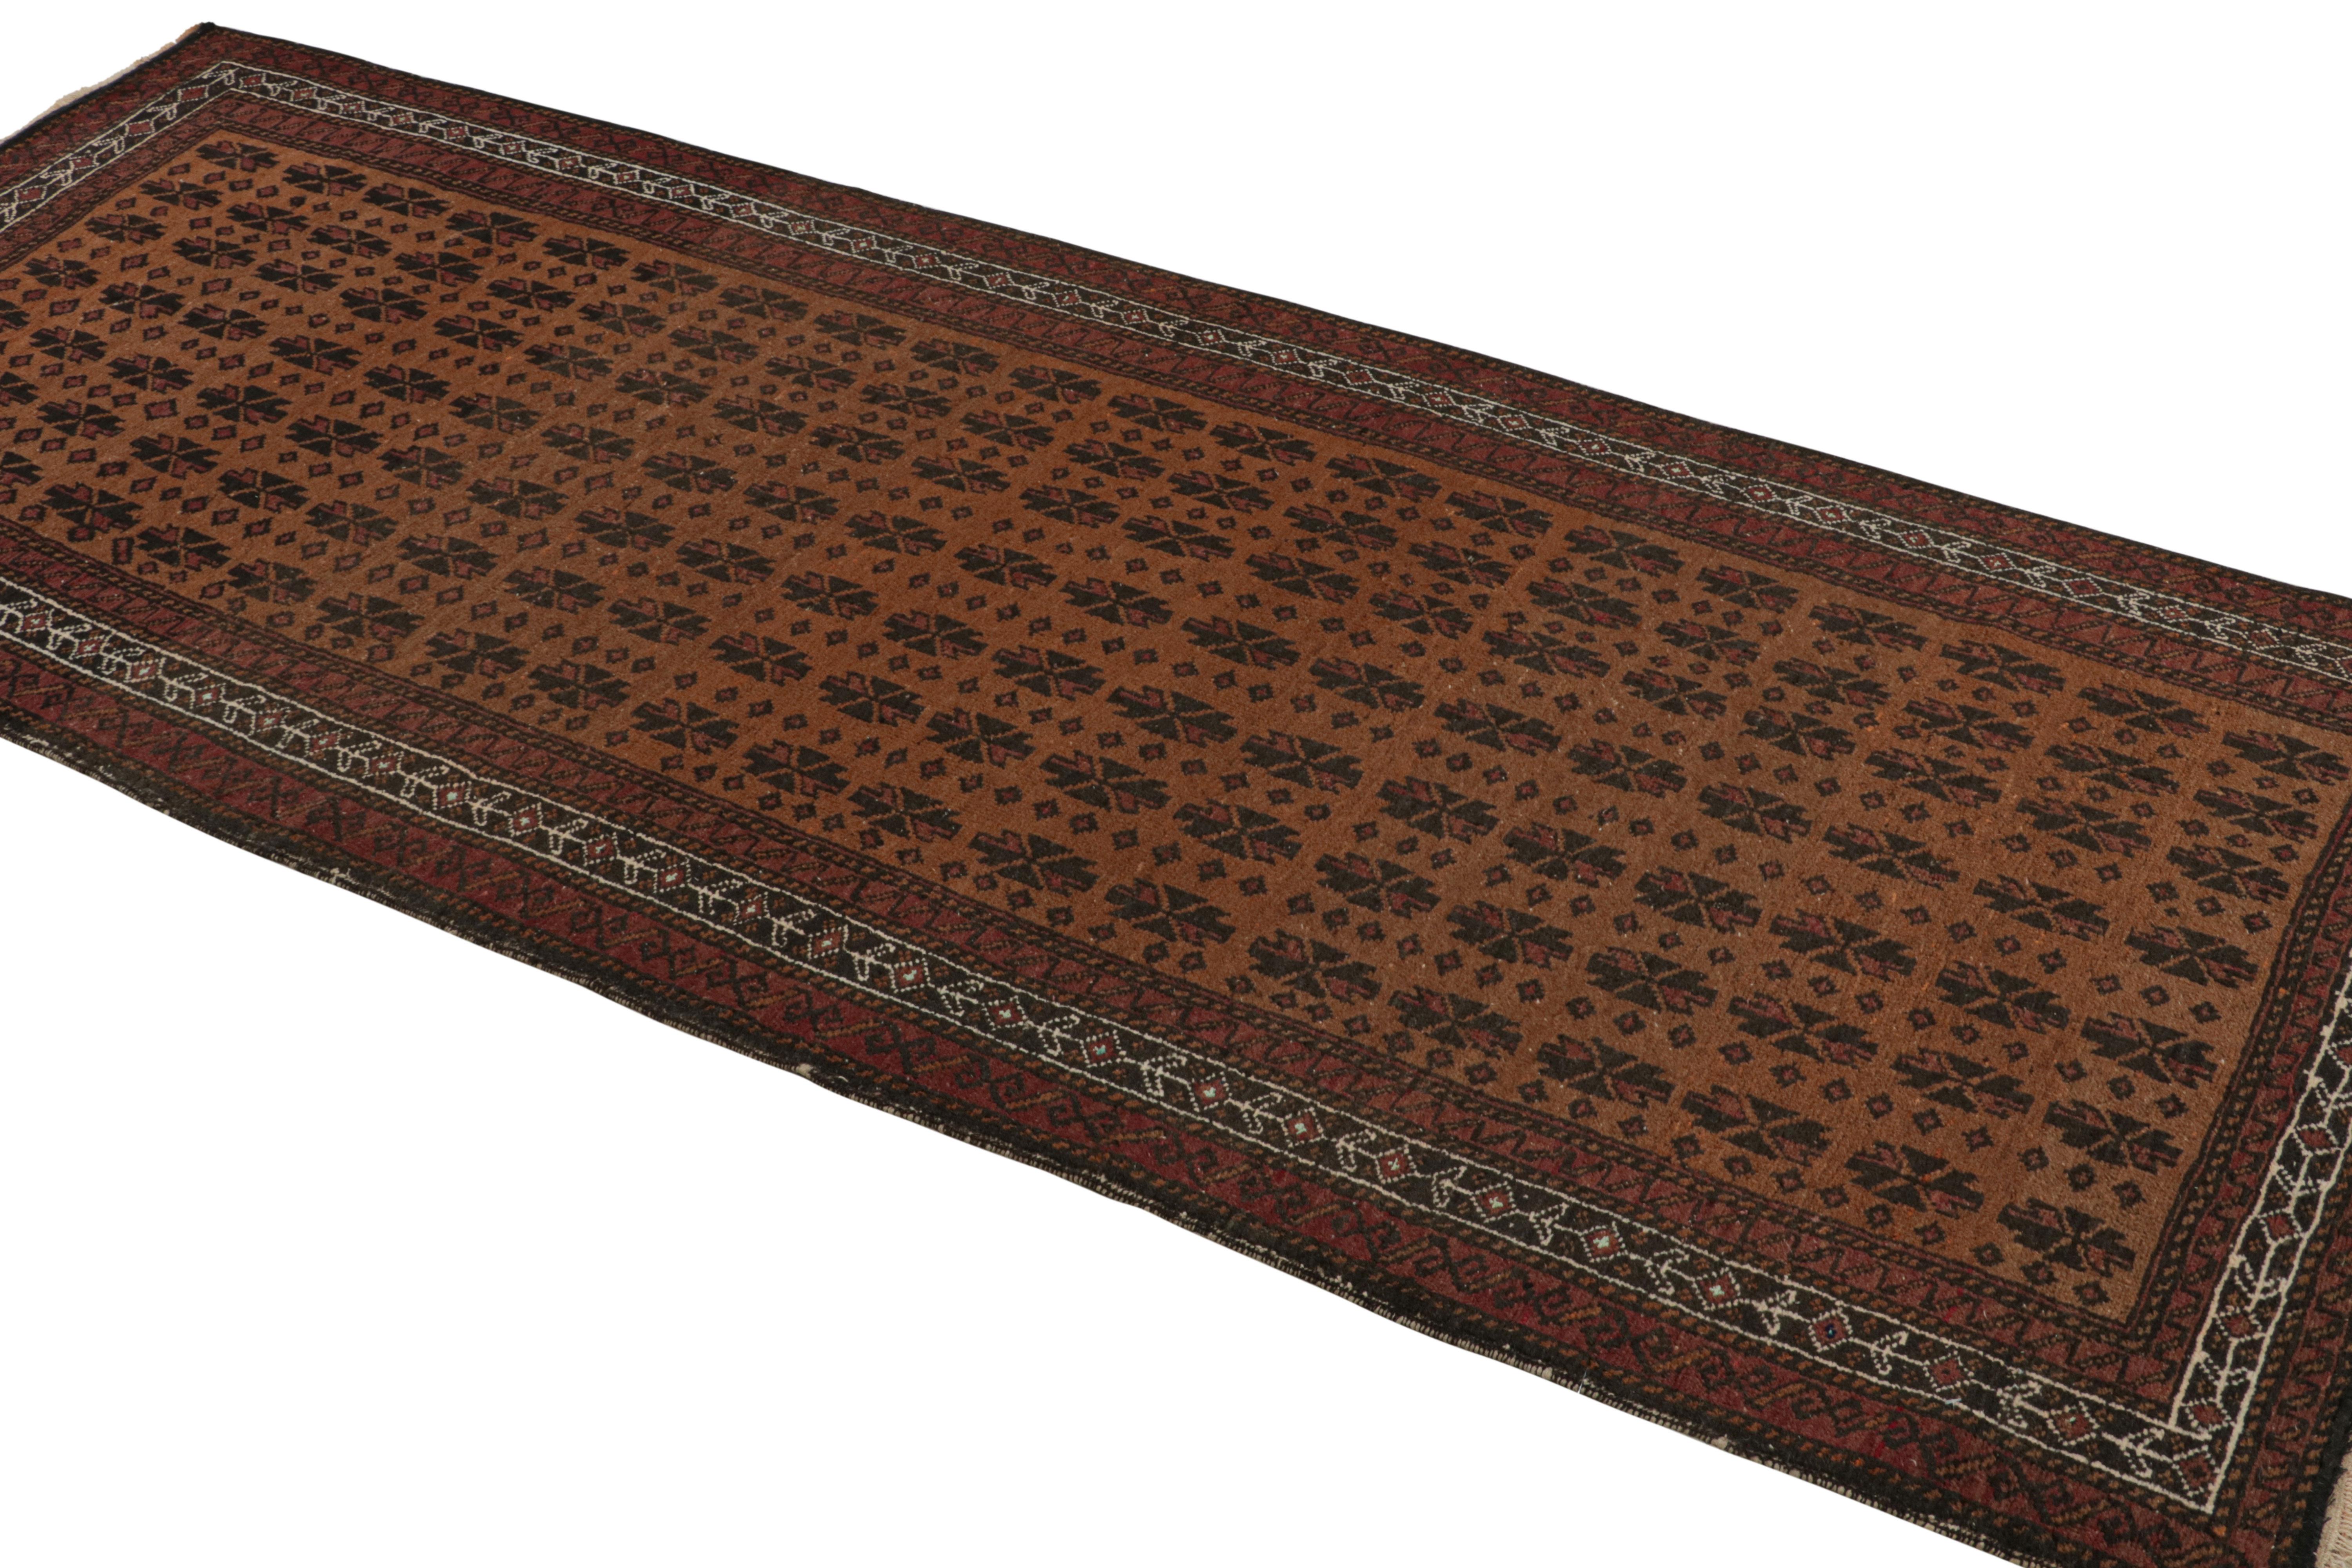 Hand-knotted in wool circa 1950-1960, this 4x9 vintage Persian Baluch runner rug features geometric patterns in burgundy and black, both in field and border alike. 

On the Design: 

Coming from the Baluch tribe, this runner rug boasts patterns in